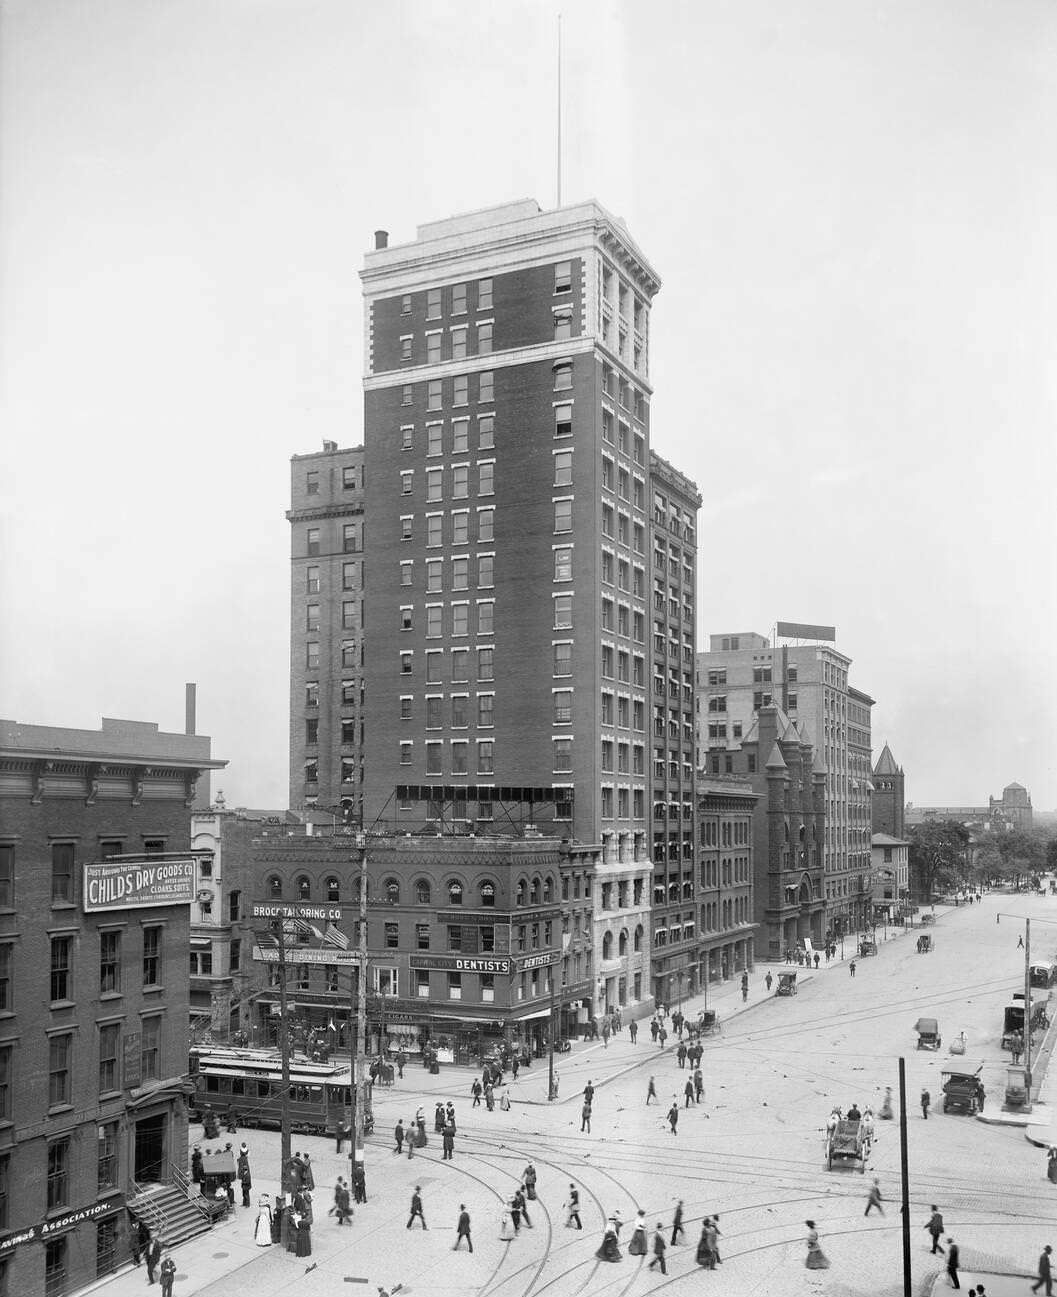 High and Broad Streets, Columbus, Ohio, 1905